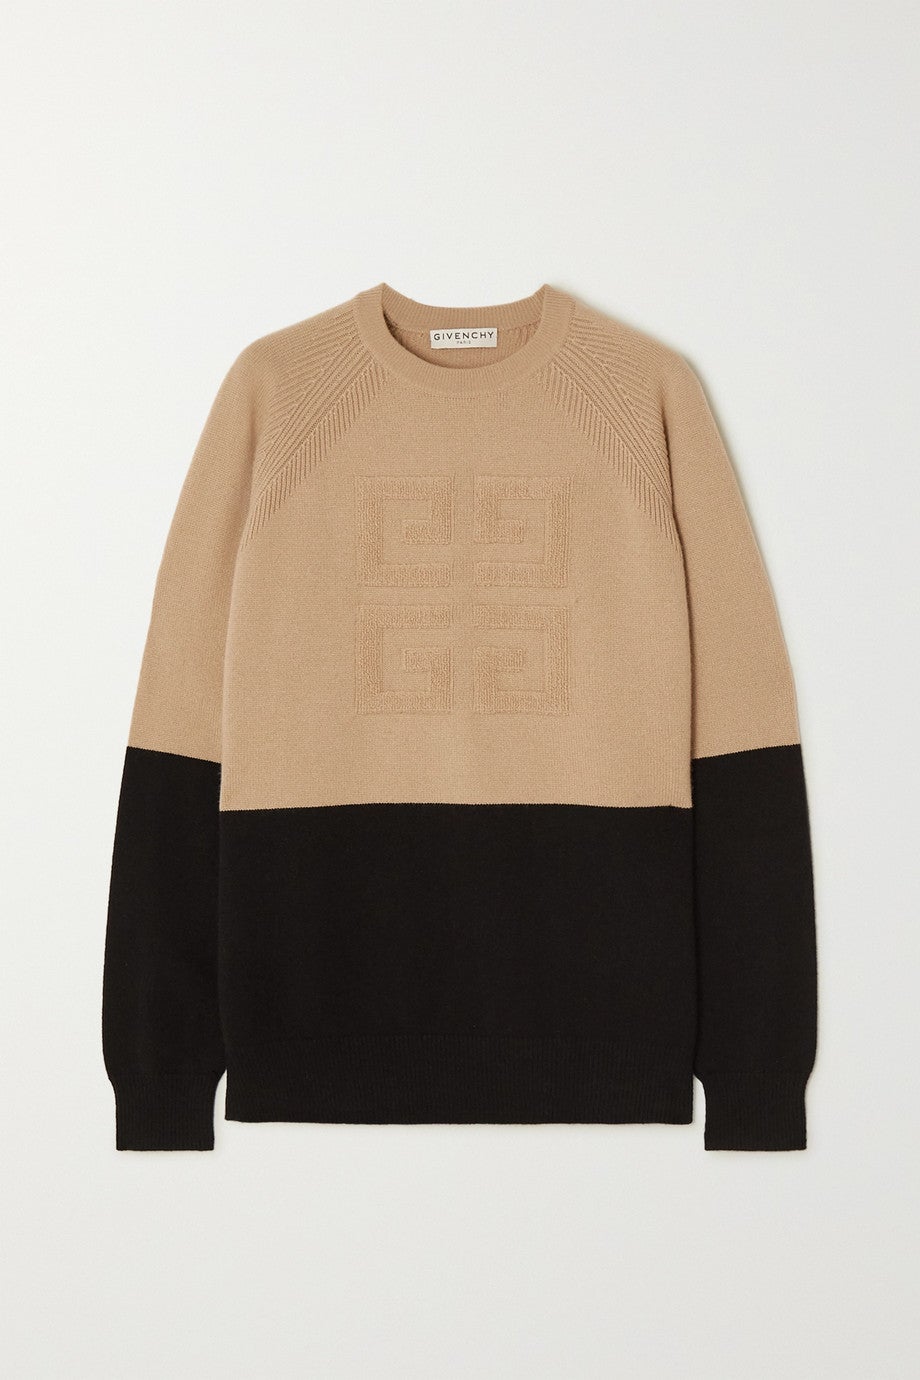 Givenchy + Two-Tone Cashmere Sweater